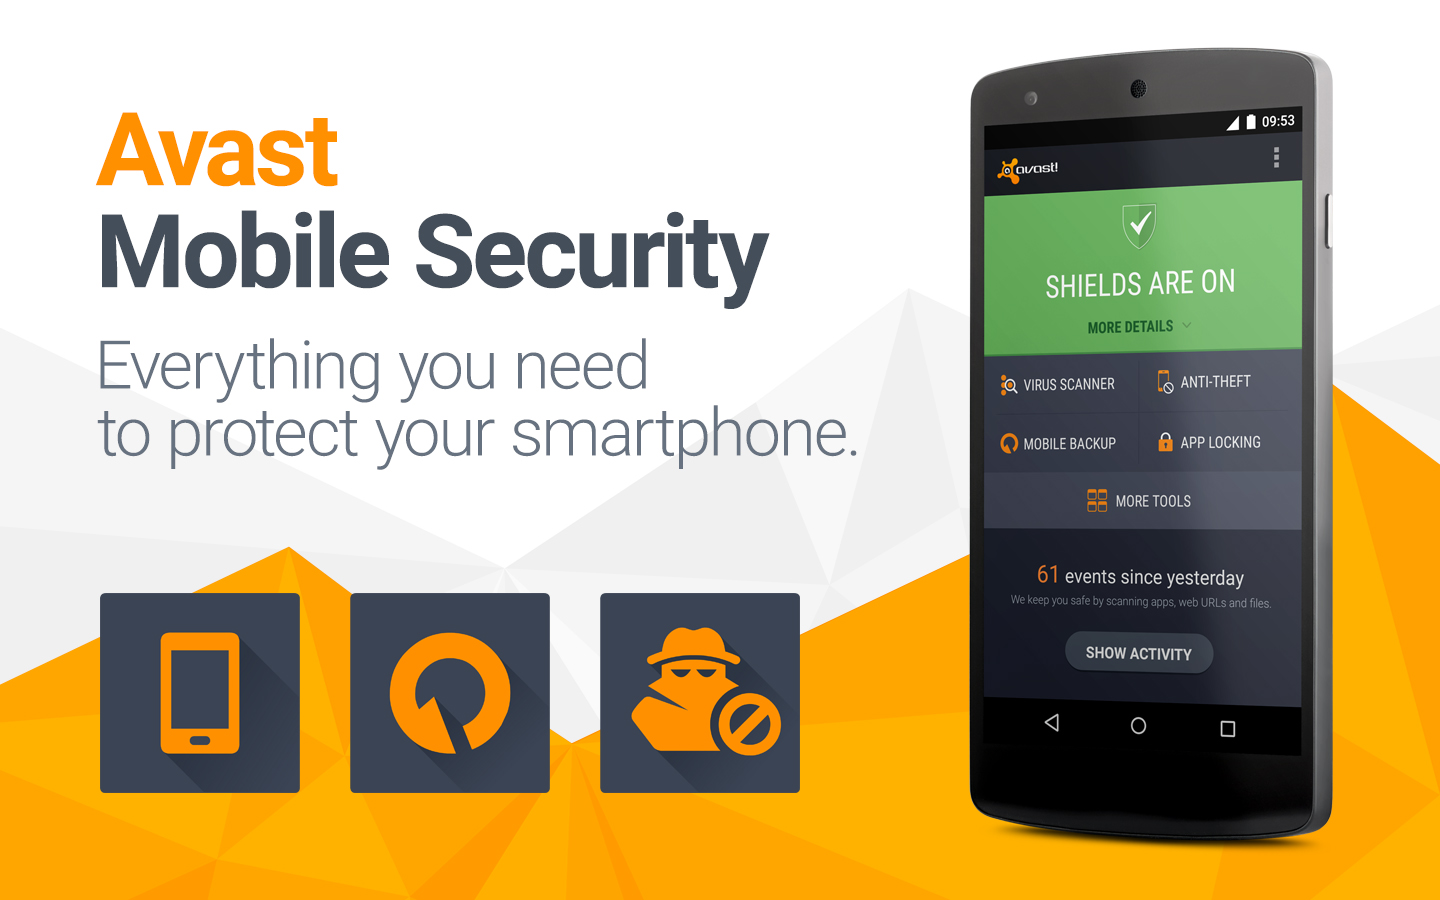 Avast Mobile Security is a top-rated mobile security app.